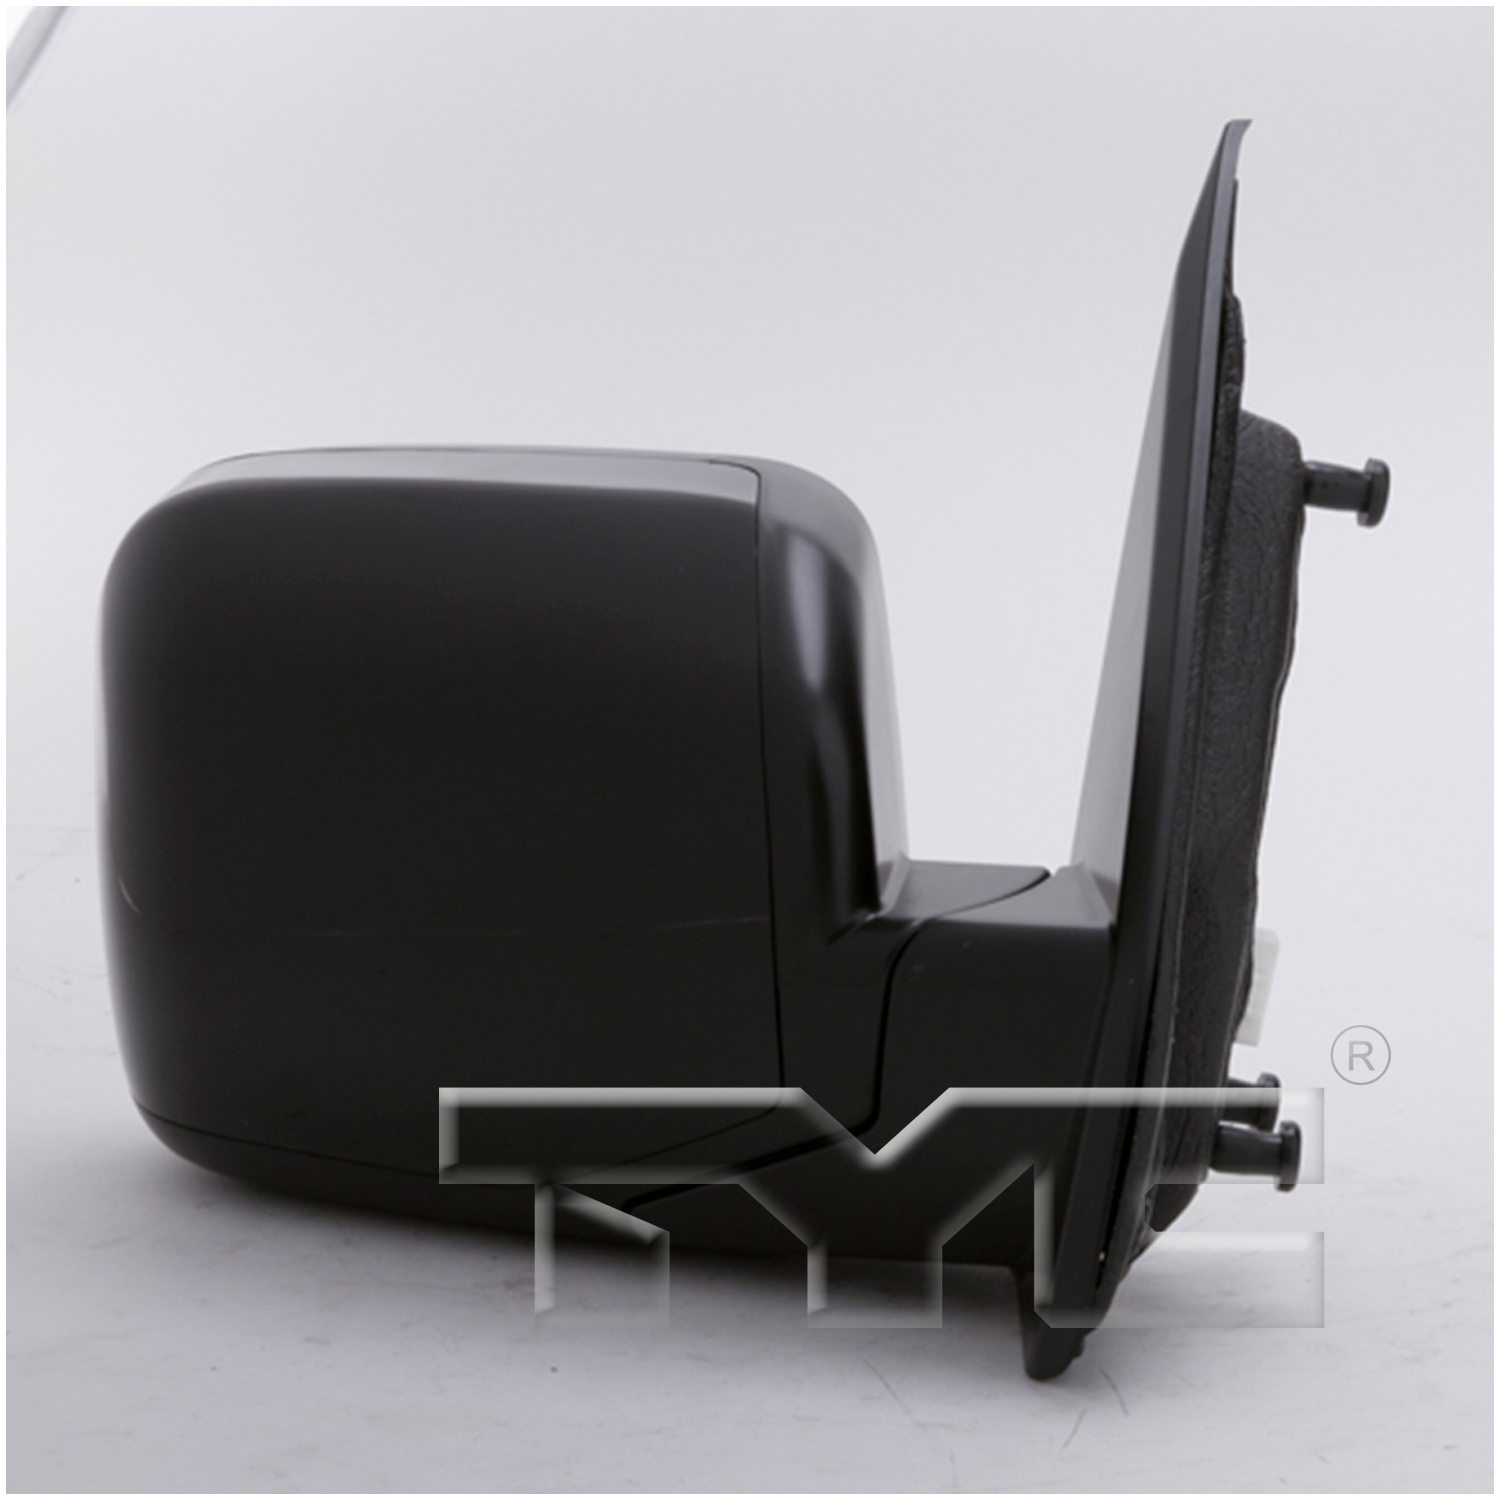 Aftermarket MIRRORS for HONDA - PILOT, PILOT,09-11,RT Mirror outside rear view